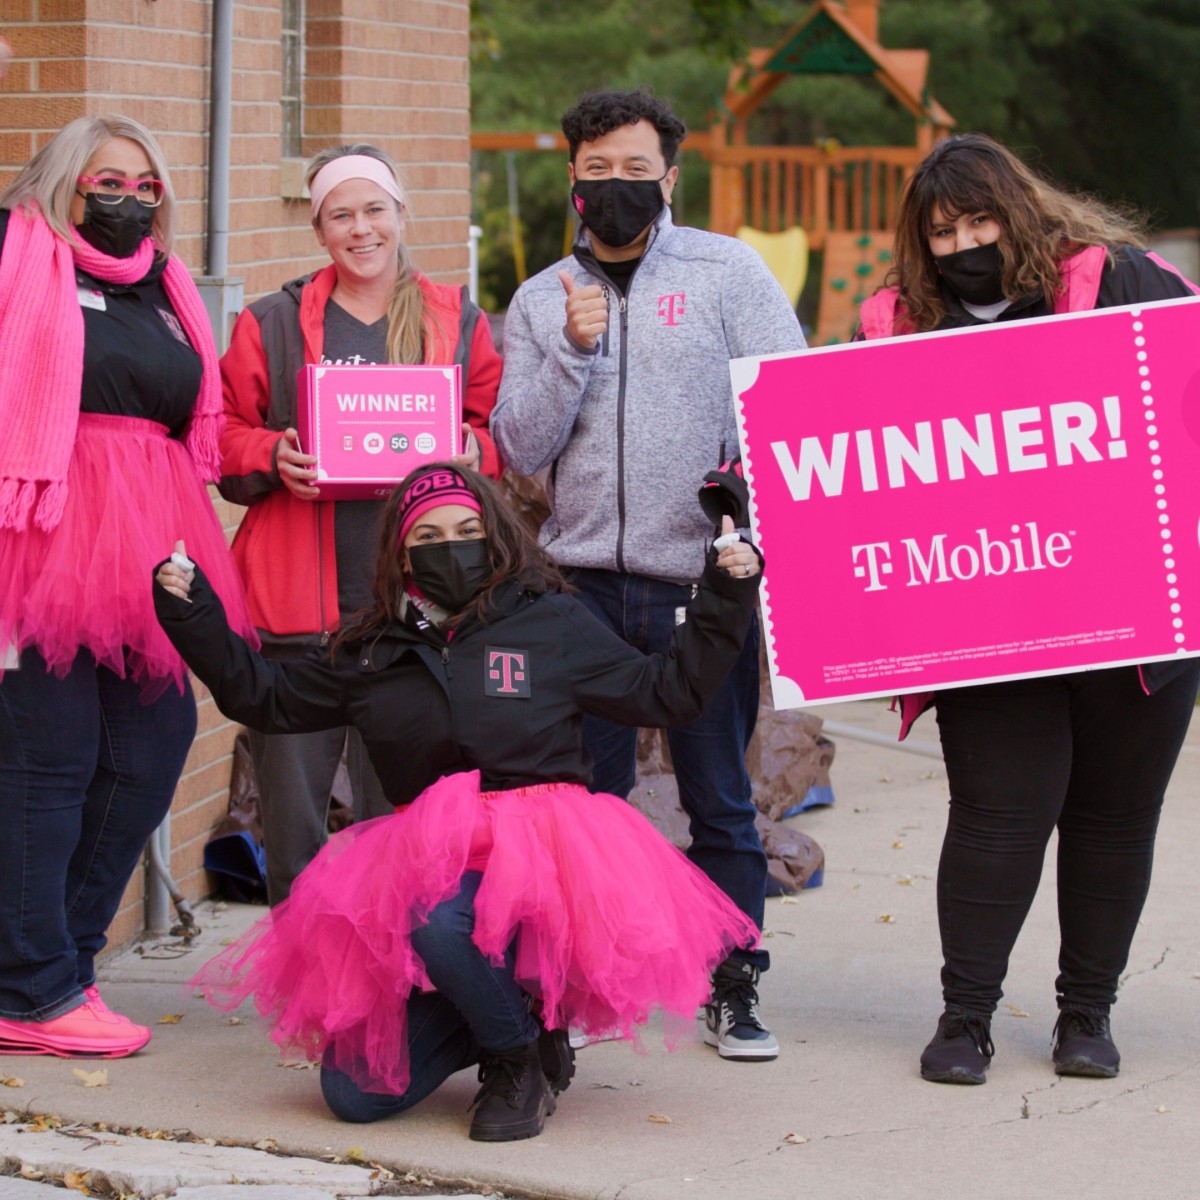 A group of people wearing bright pink accessories such as tutus and scarves wave and smile while holding a large bright pink check that says, "Winner!" with T-Mobile branding.